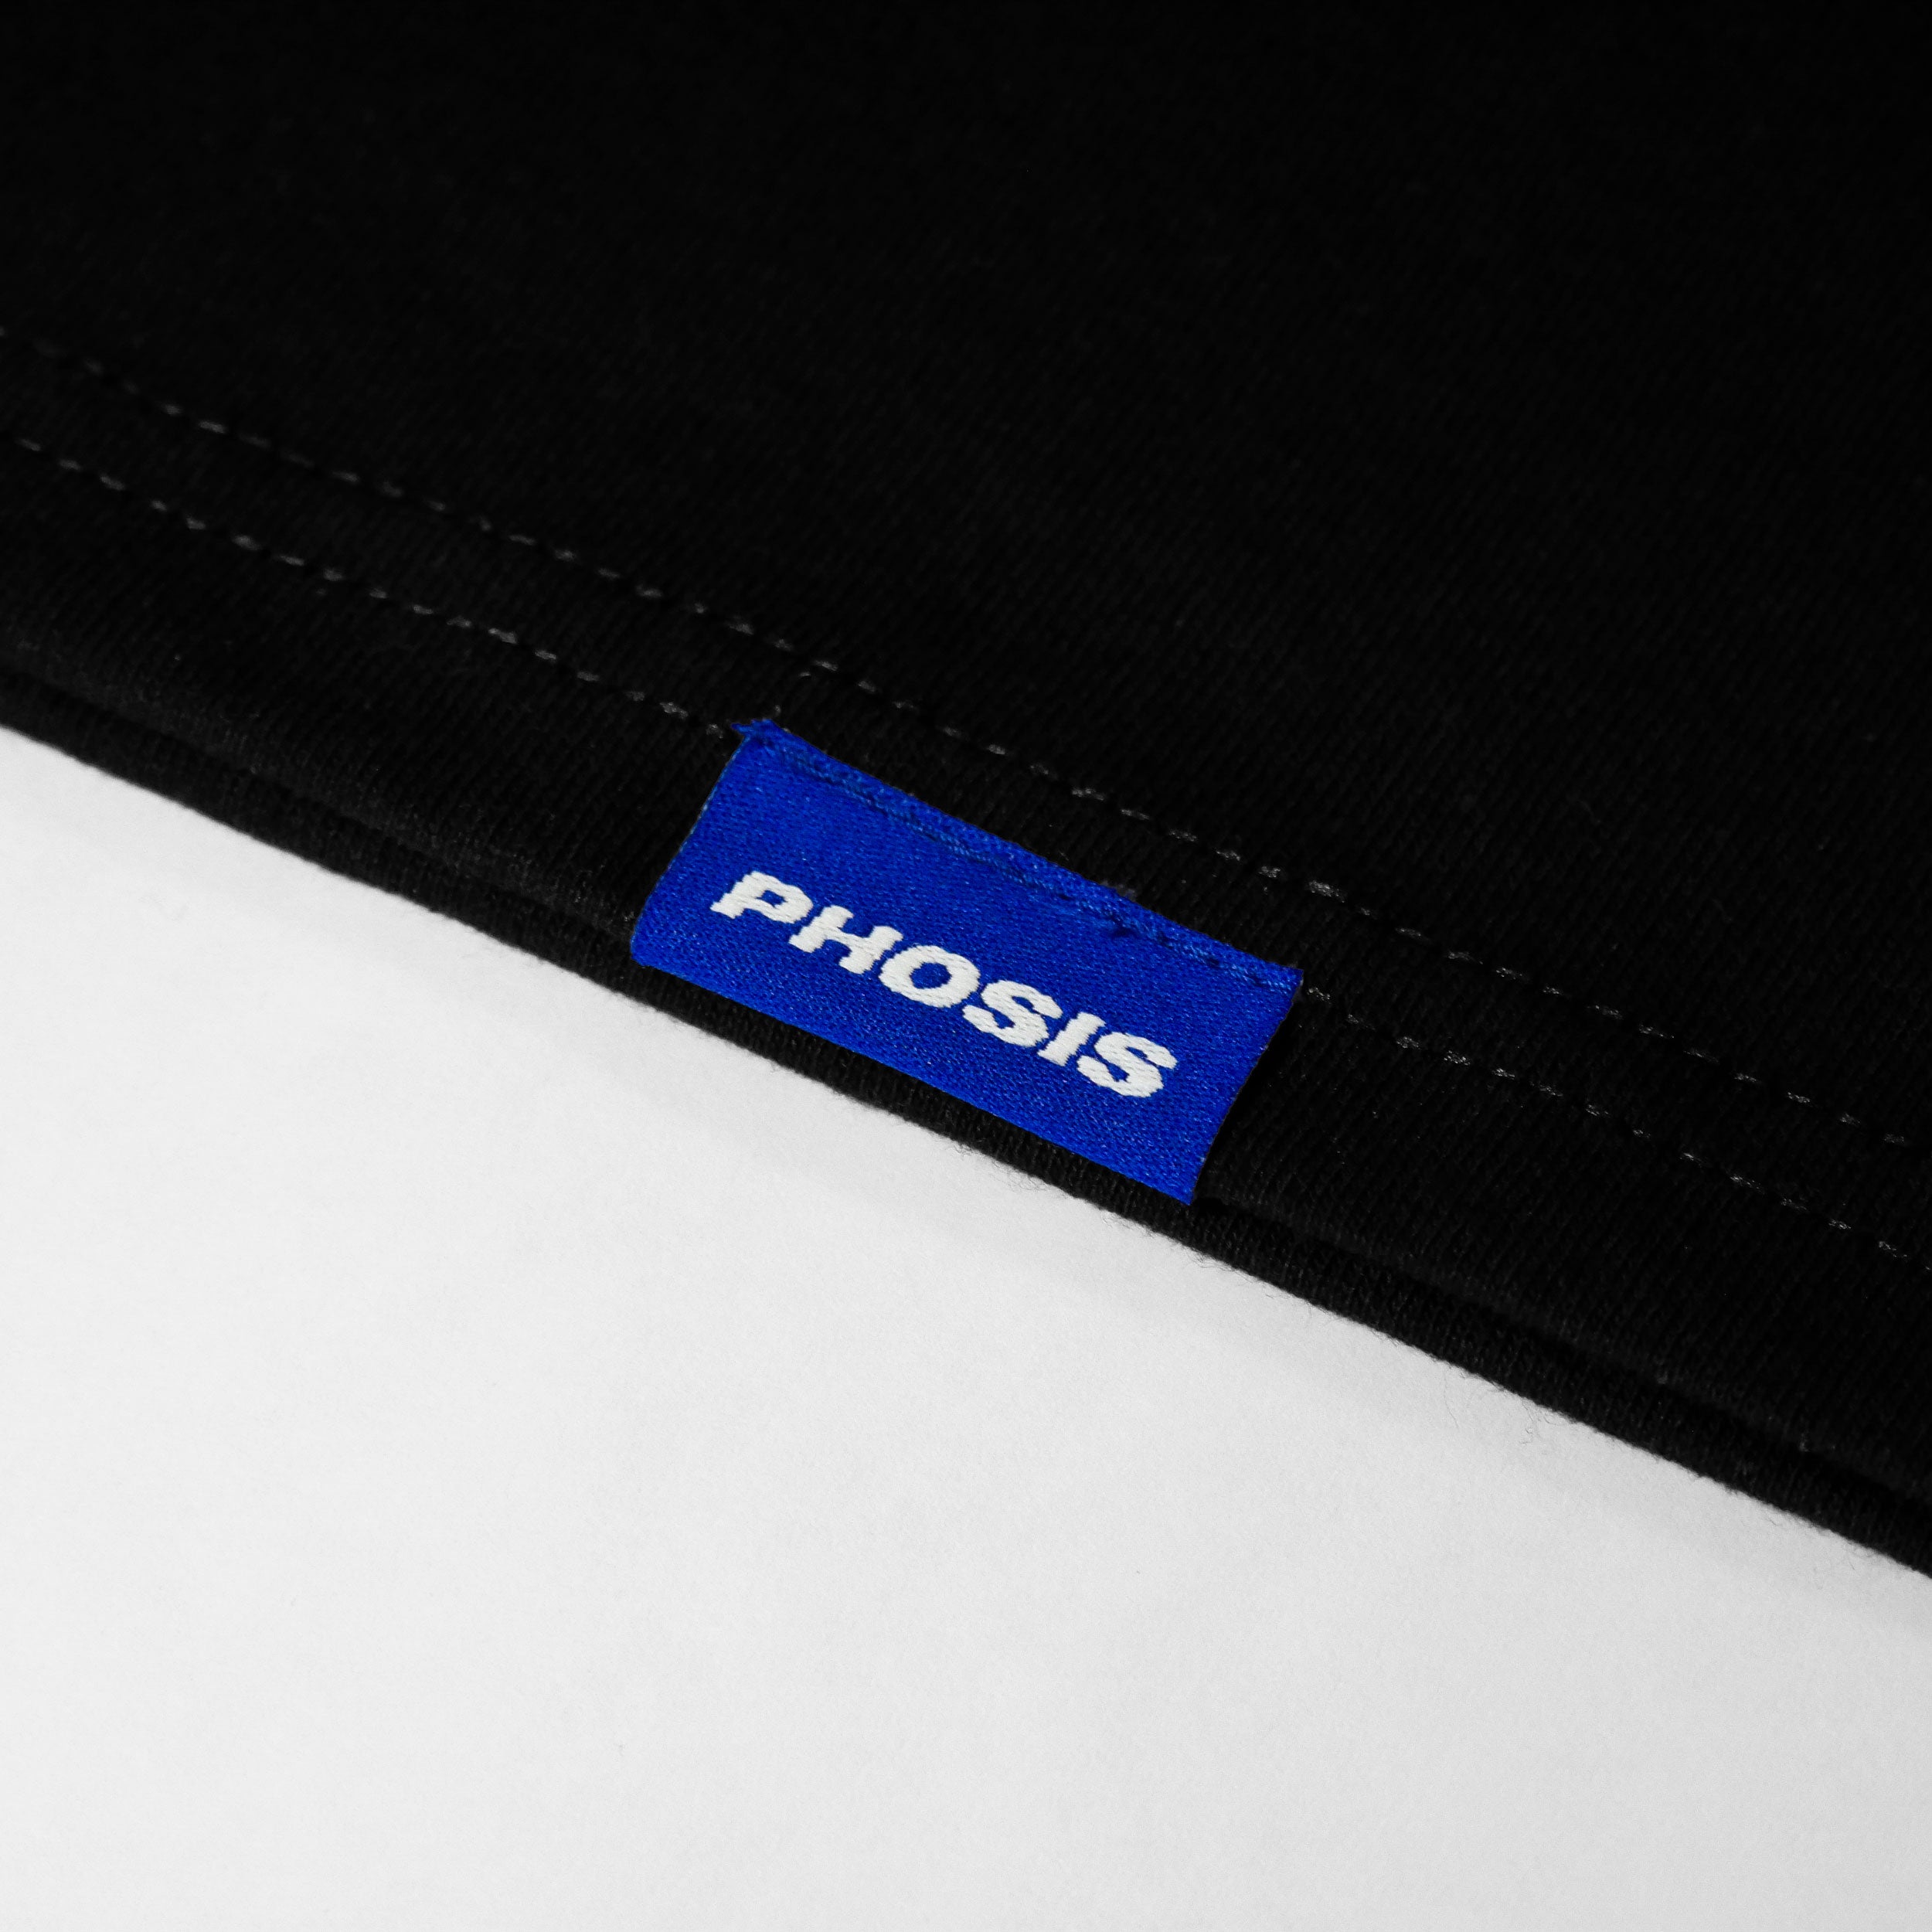 Close up view of the blue woven label in the ARCHETYPE black heavyweight cotton t-shirt from PHOSIS® Clothing